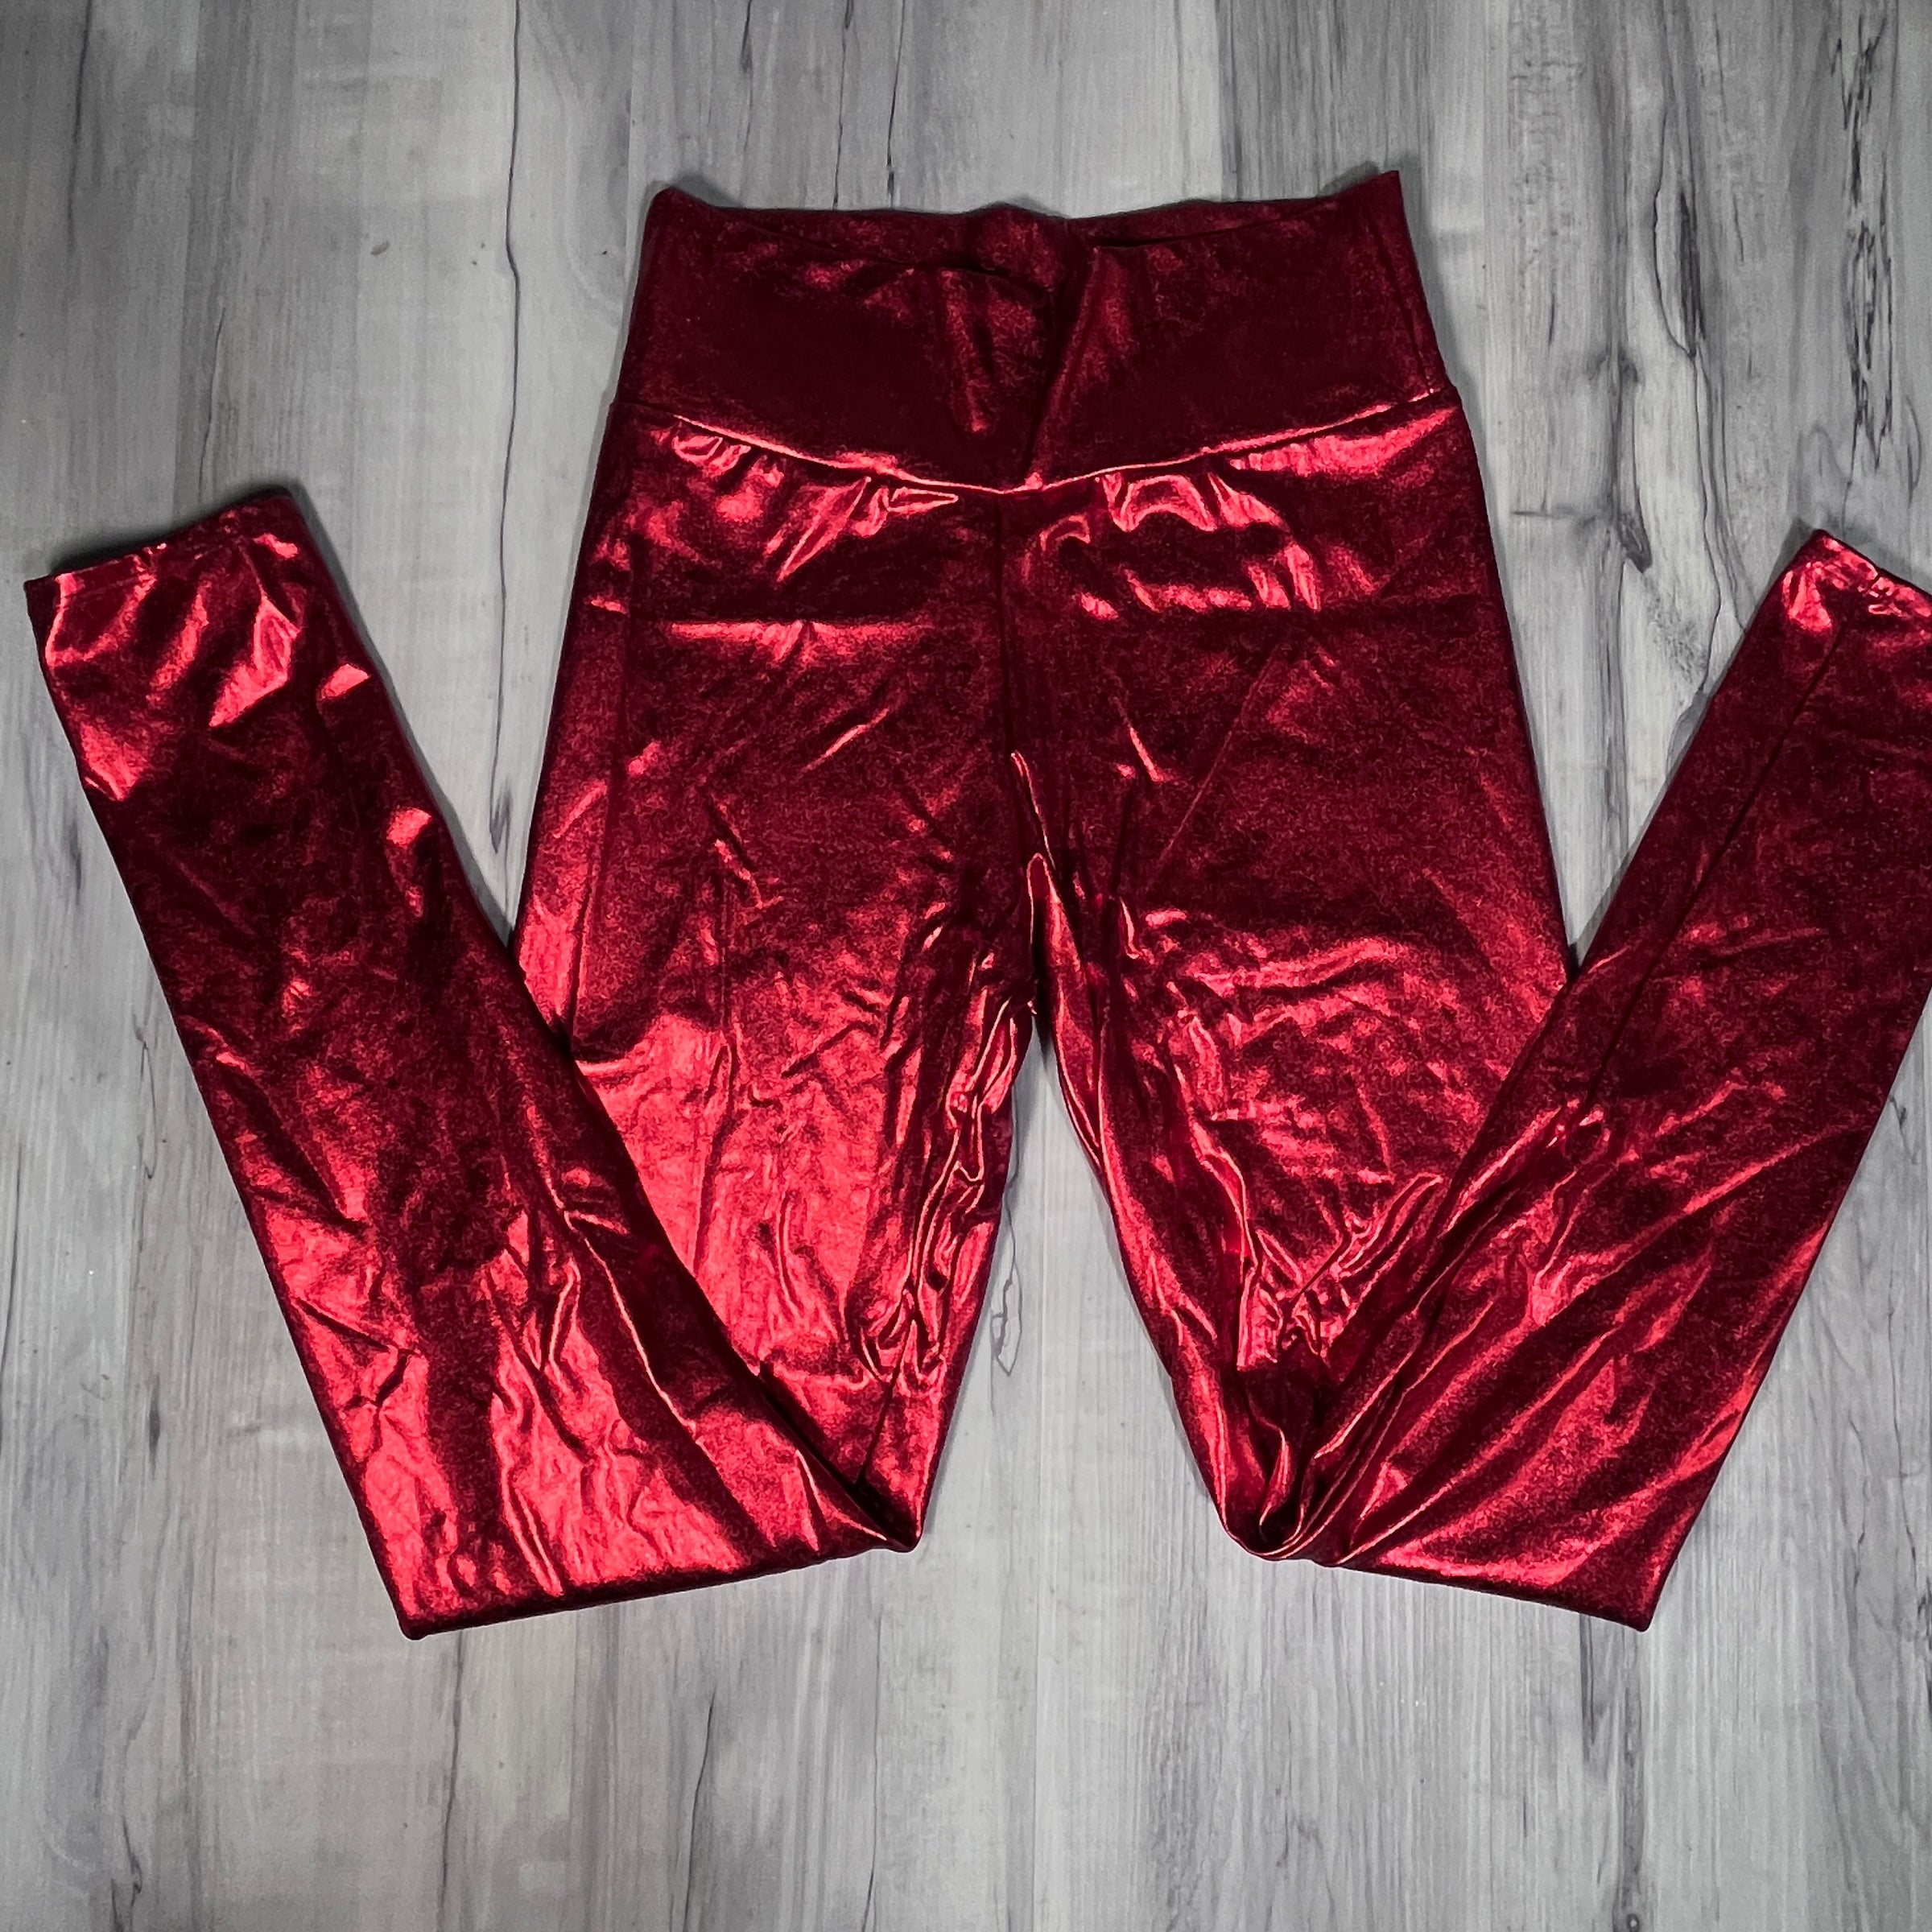 SALE - LARGE ONLY - Red Metallic High Waisted Leggings Pants– Peridot  Clothing